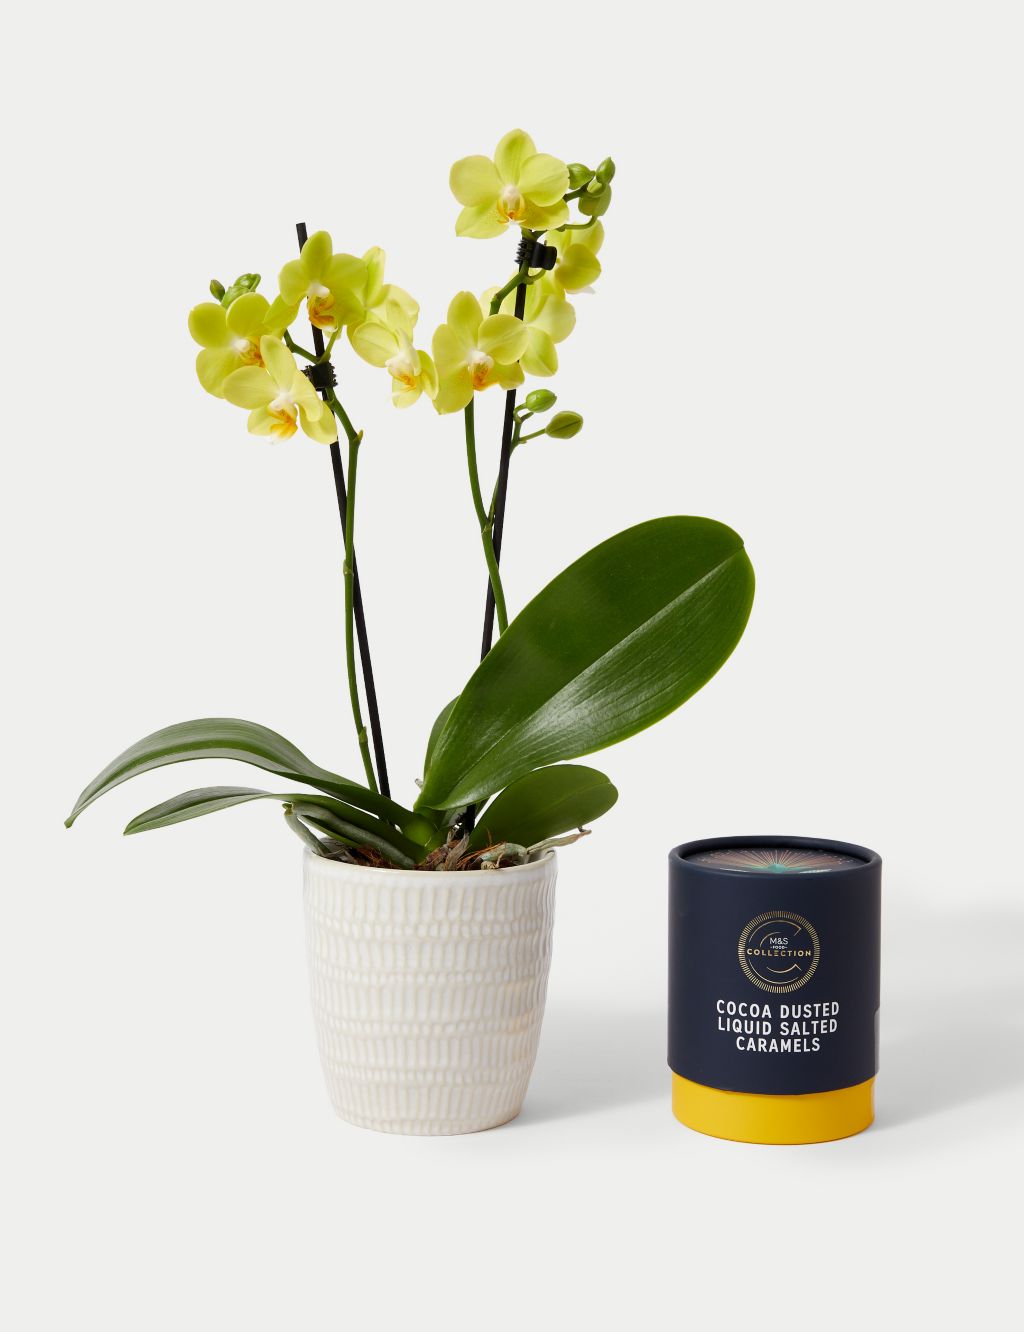 Miniature Yellow Phalaenopsis Orchid Ceramic & Cocoa Dusted Liquid Salted Caramels Bundle